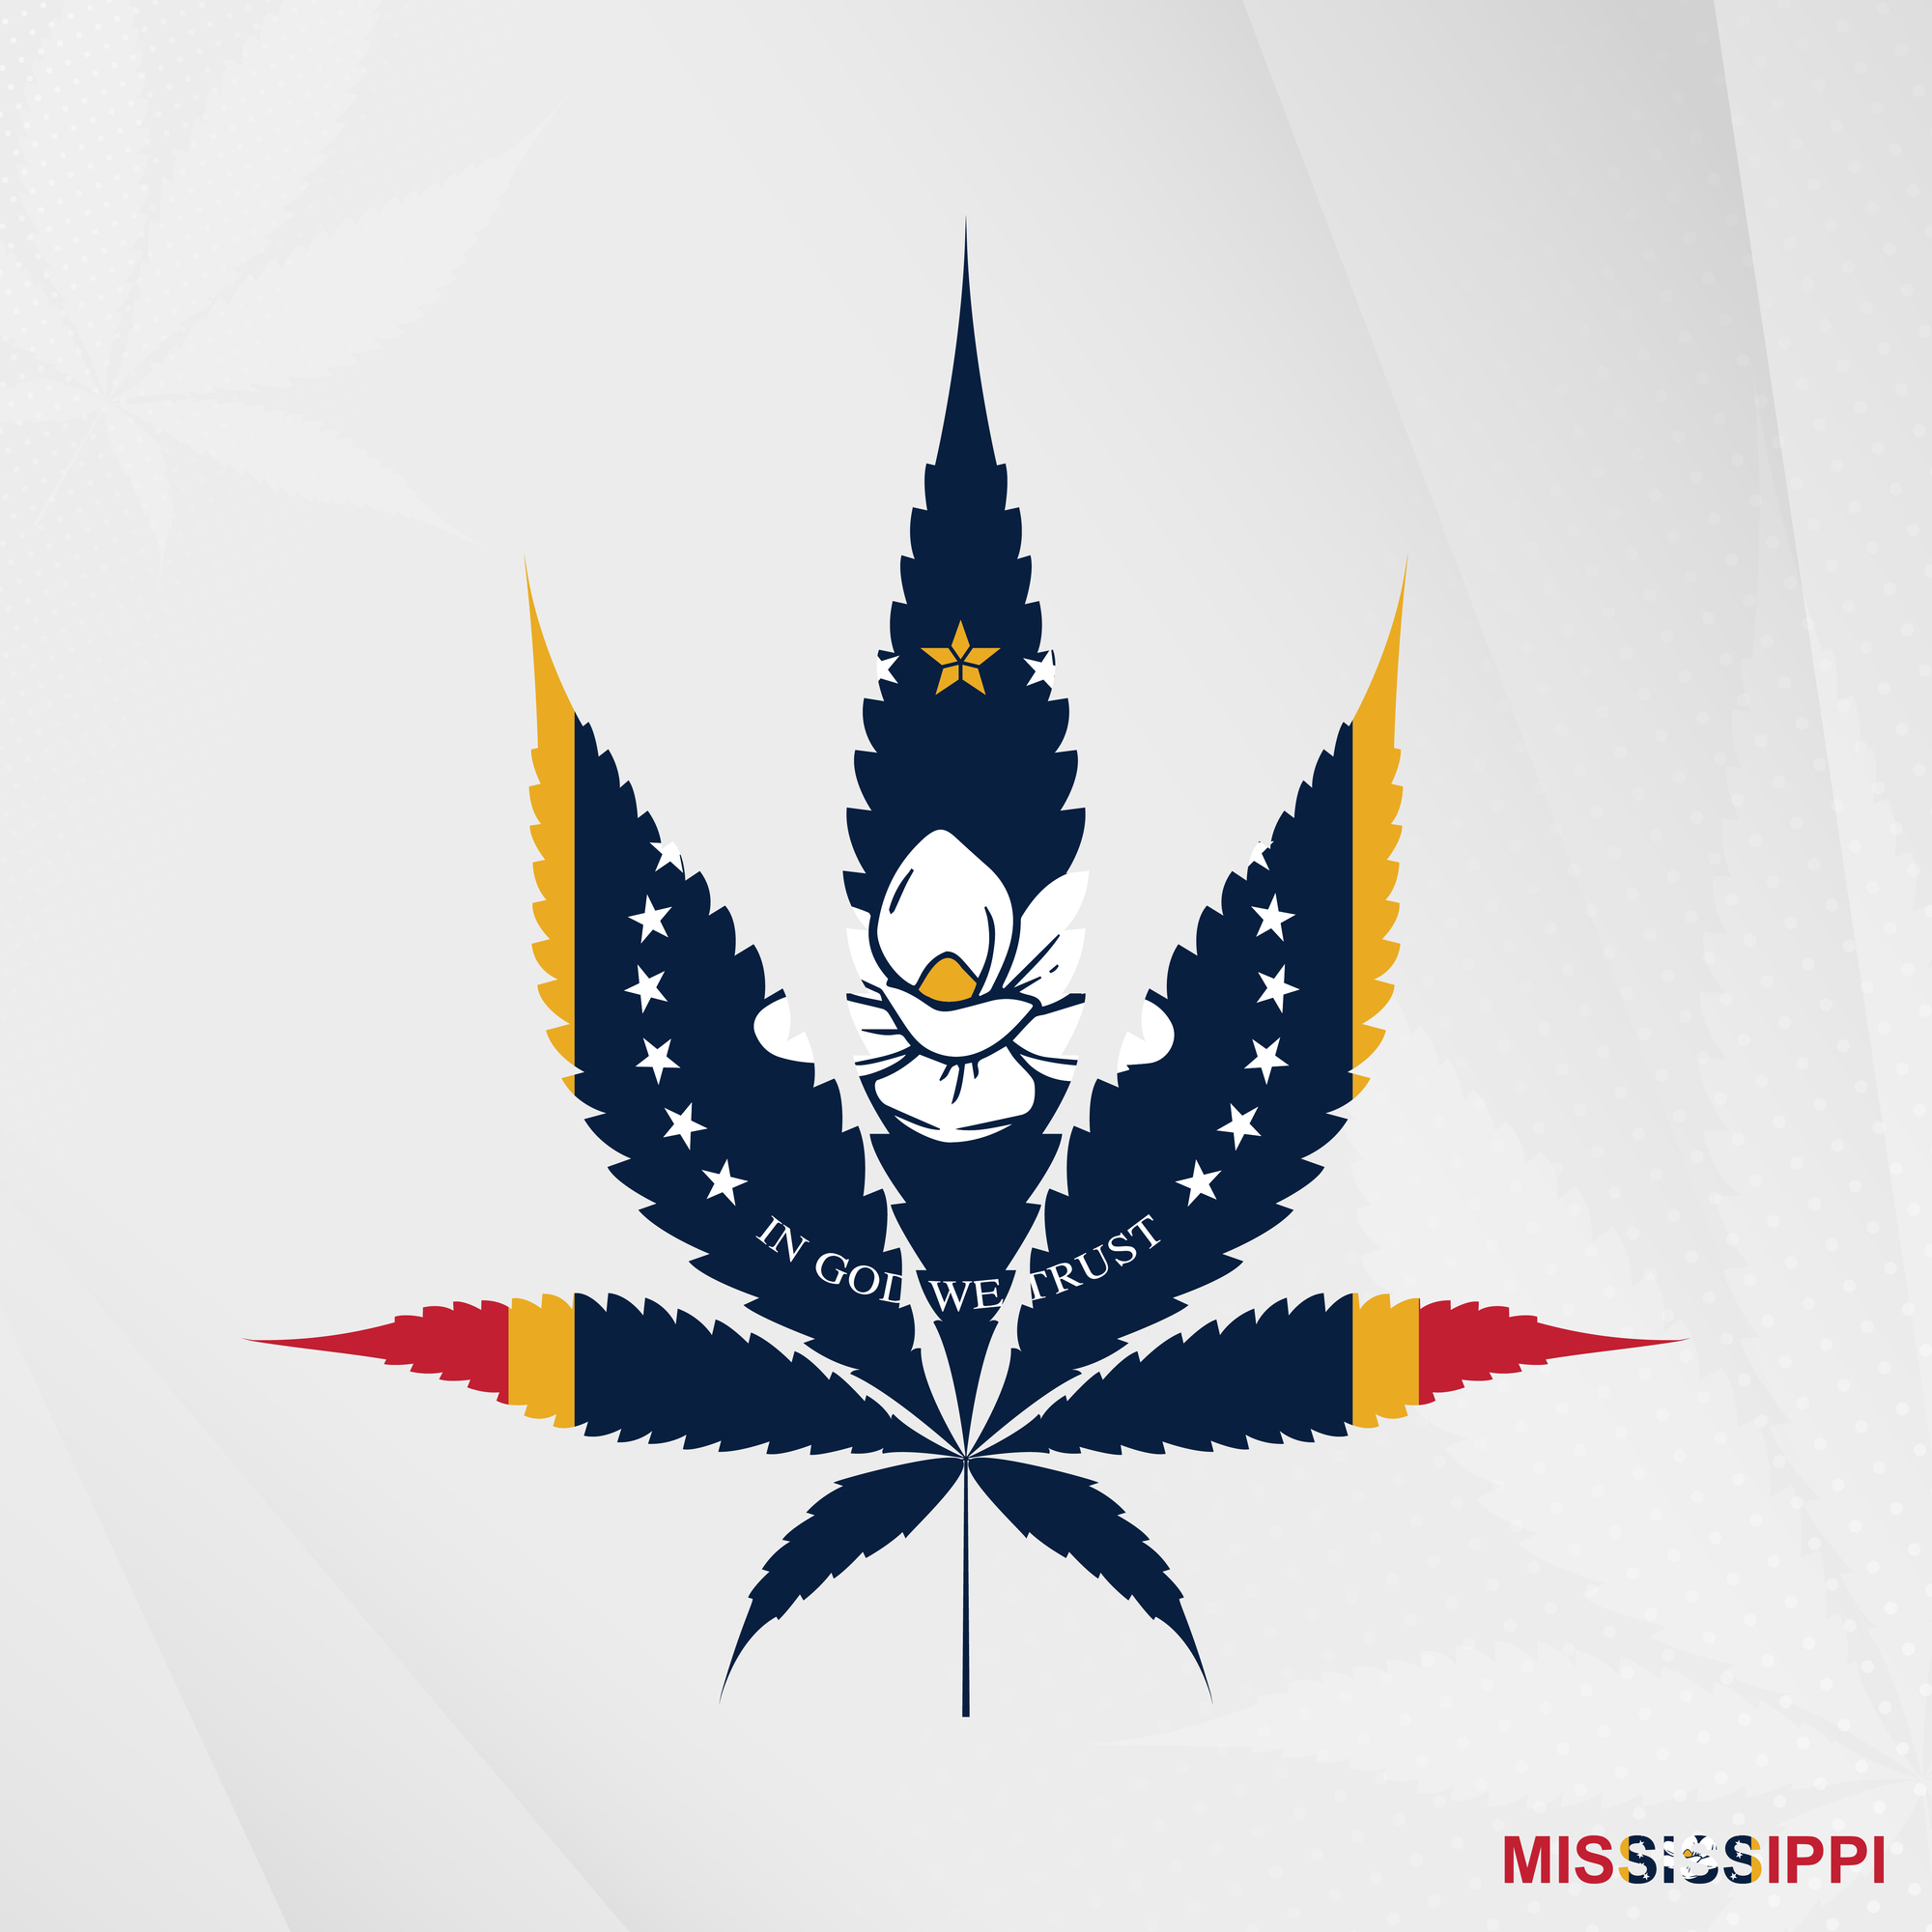 Mississippi, Medical Cannabis Advertising and the First Amendment